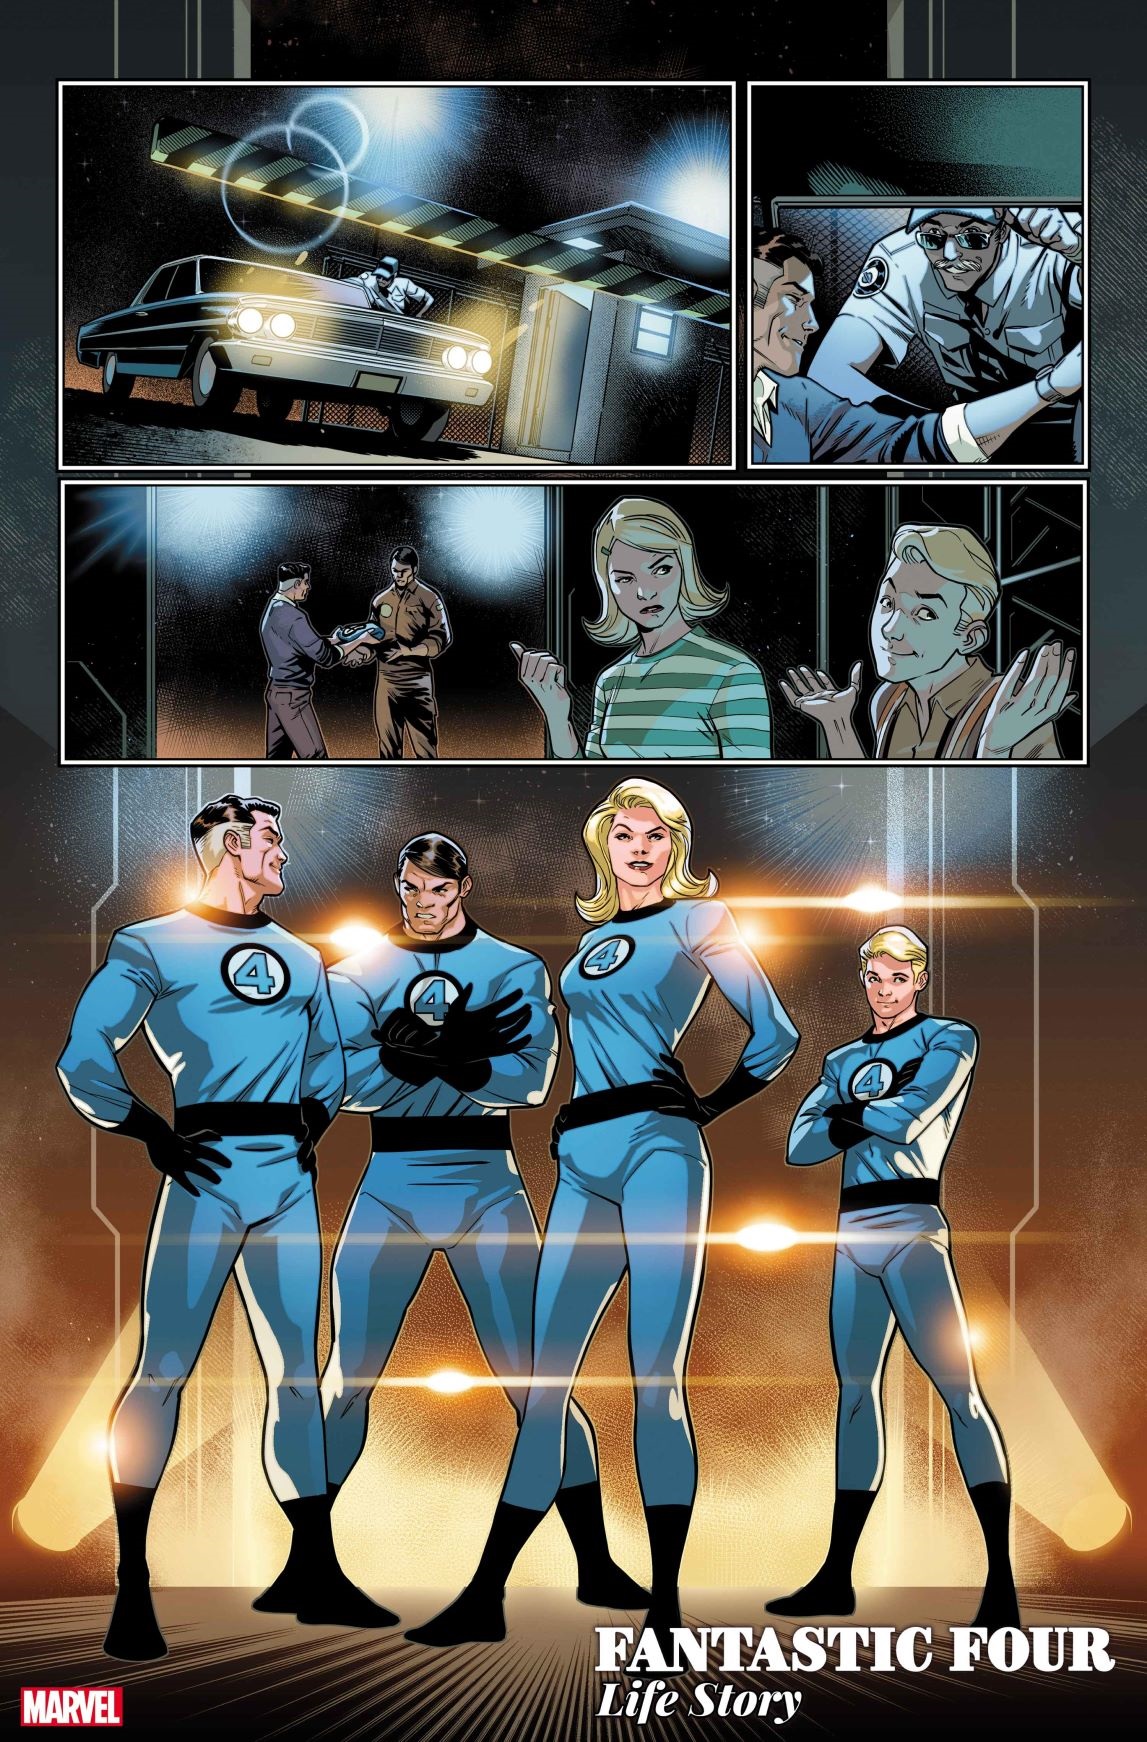 Fantastic Four Life Story #1 Booth Variant (Of 6)